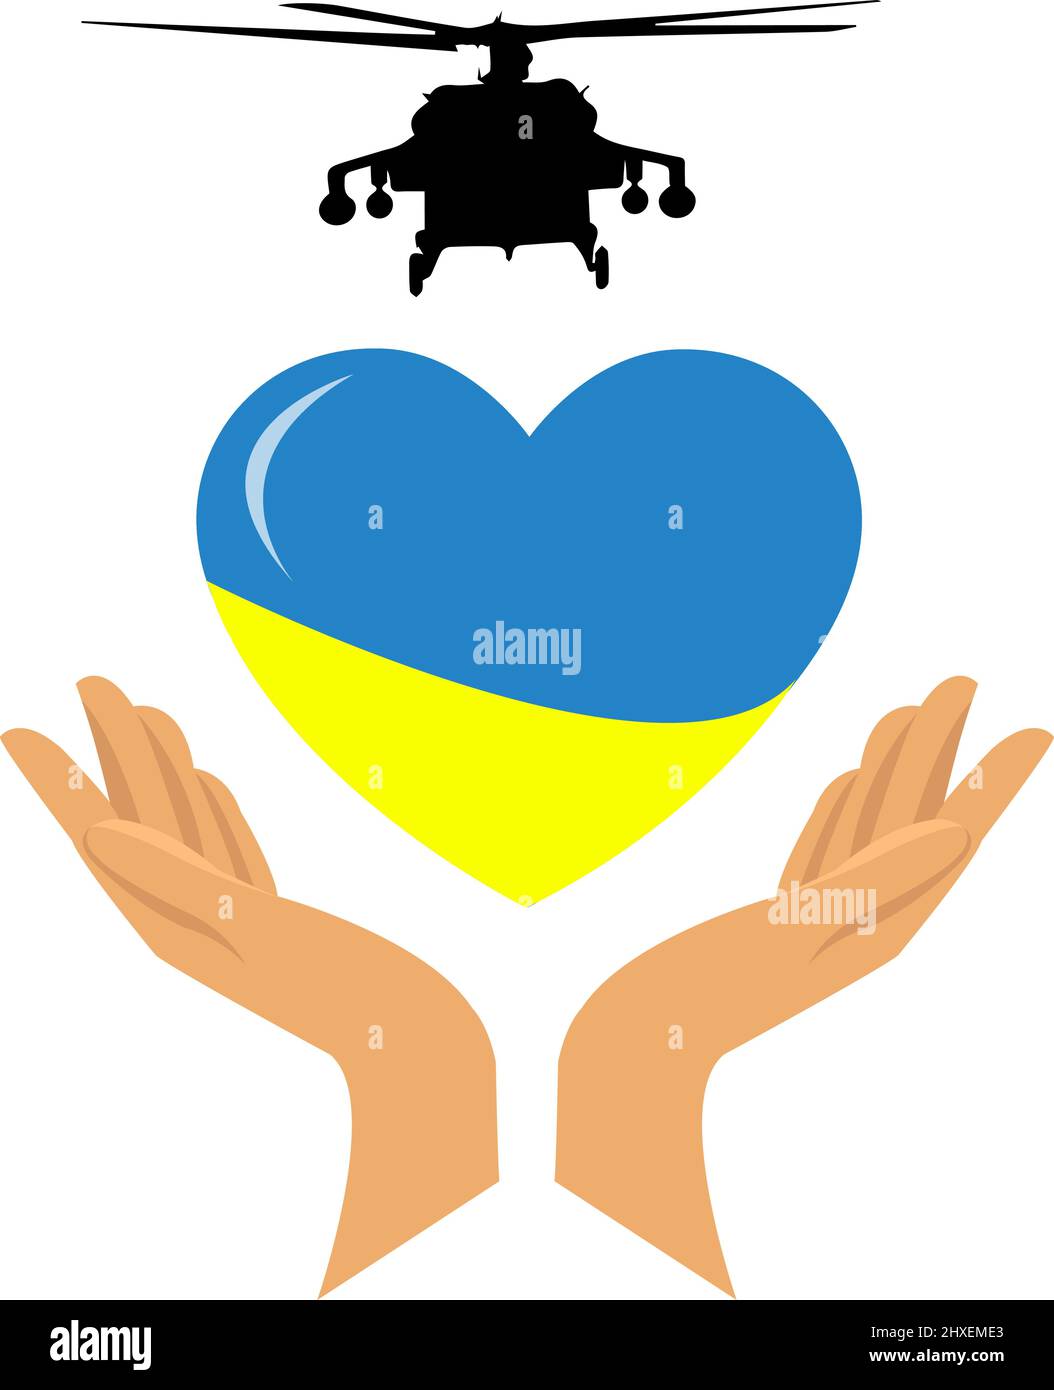 National Ukrainian flag. Vector isolated illustration. Heart icon, concept of protection and support. Stock Vector